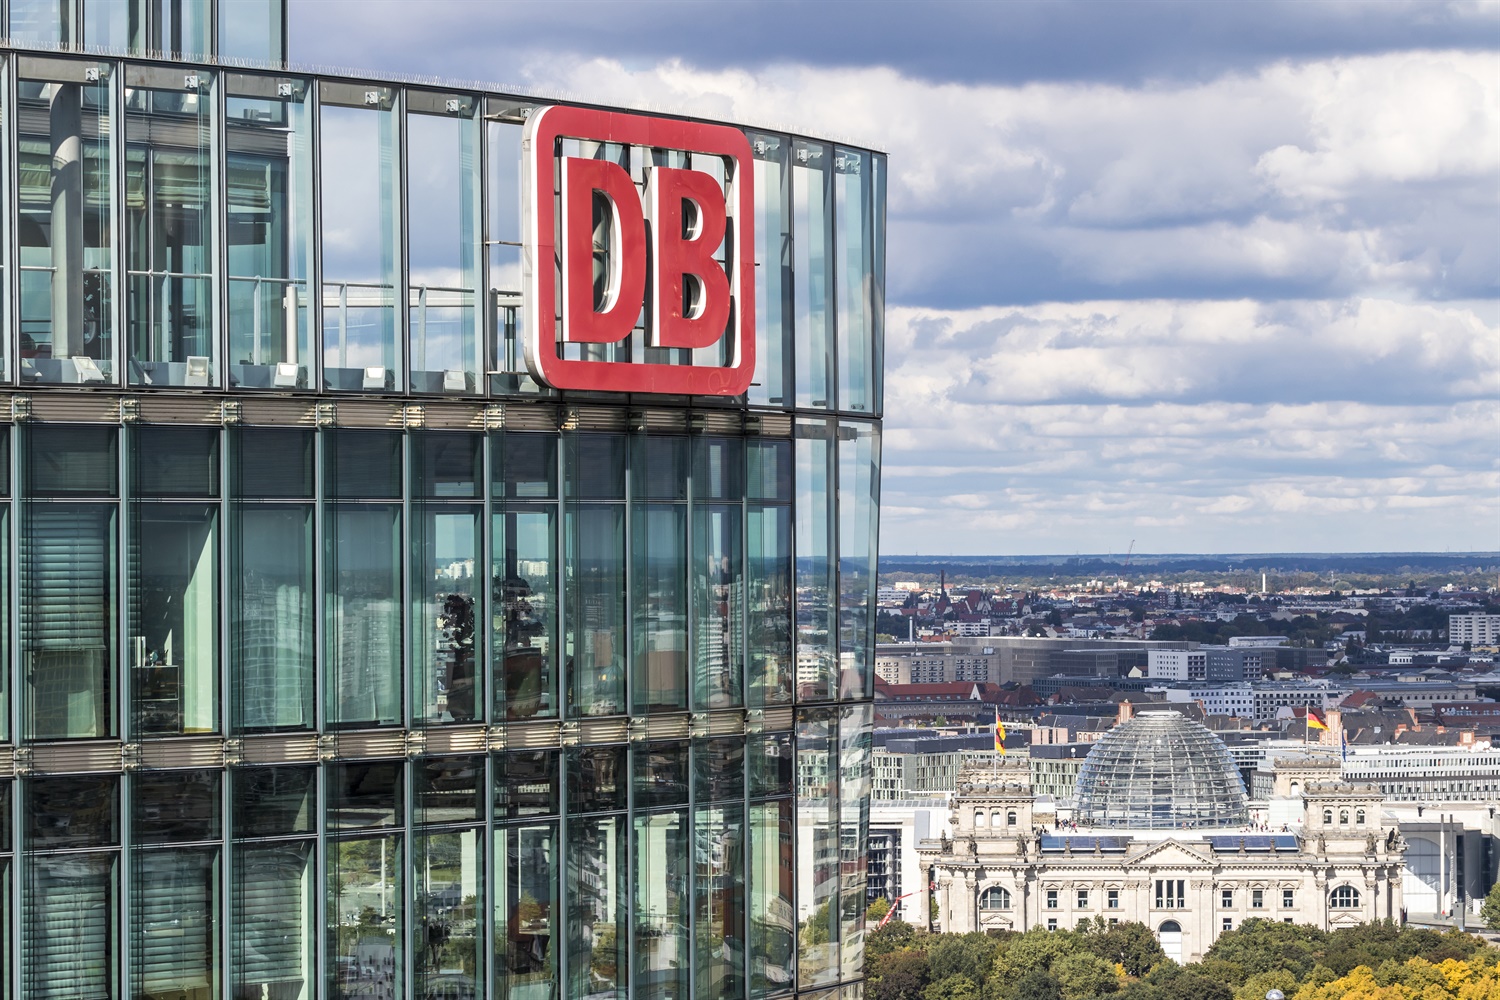 Northern owner Deutsche Bahn wants compensation from Network Rail over extensive delays and disruption